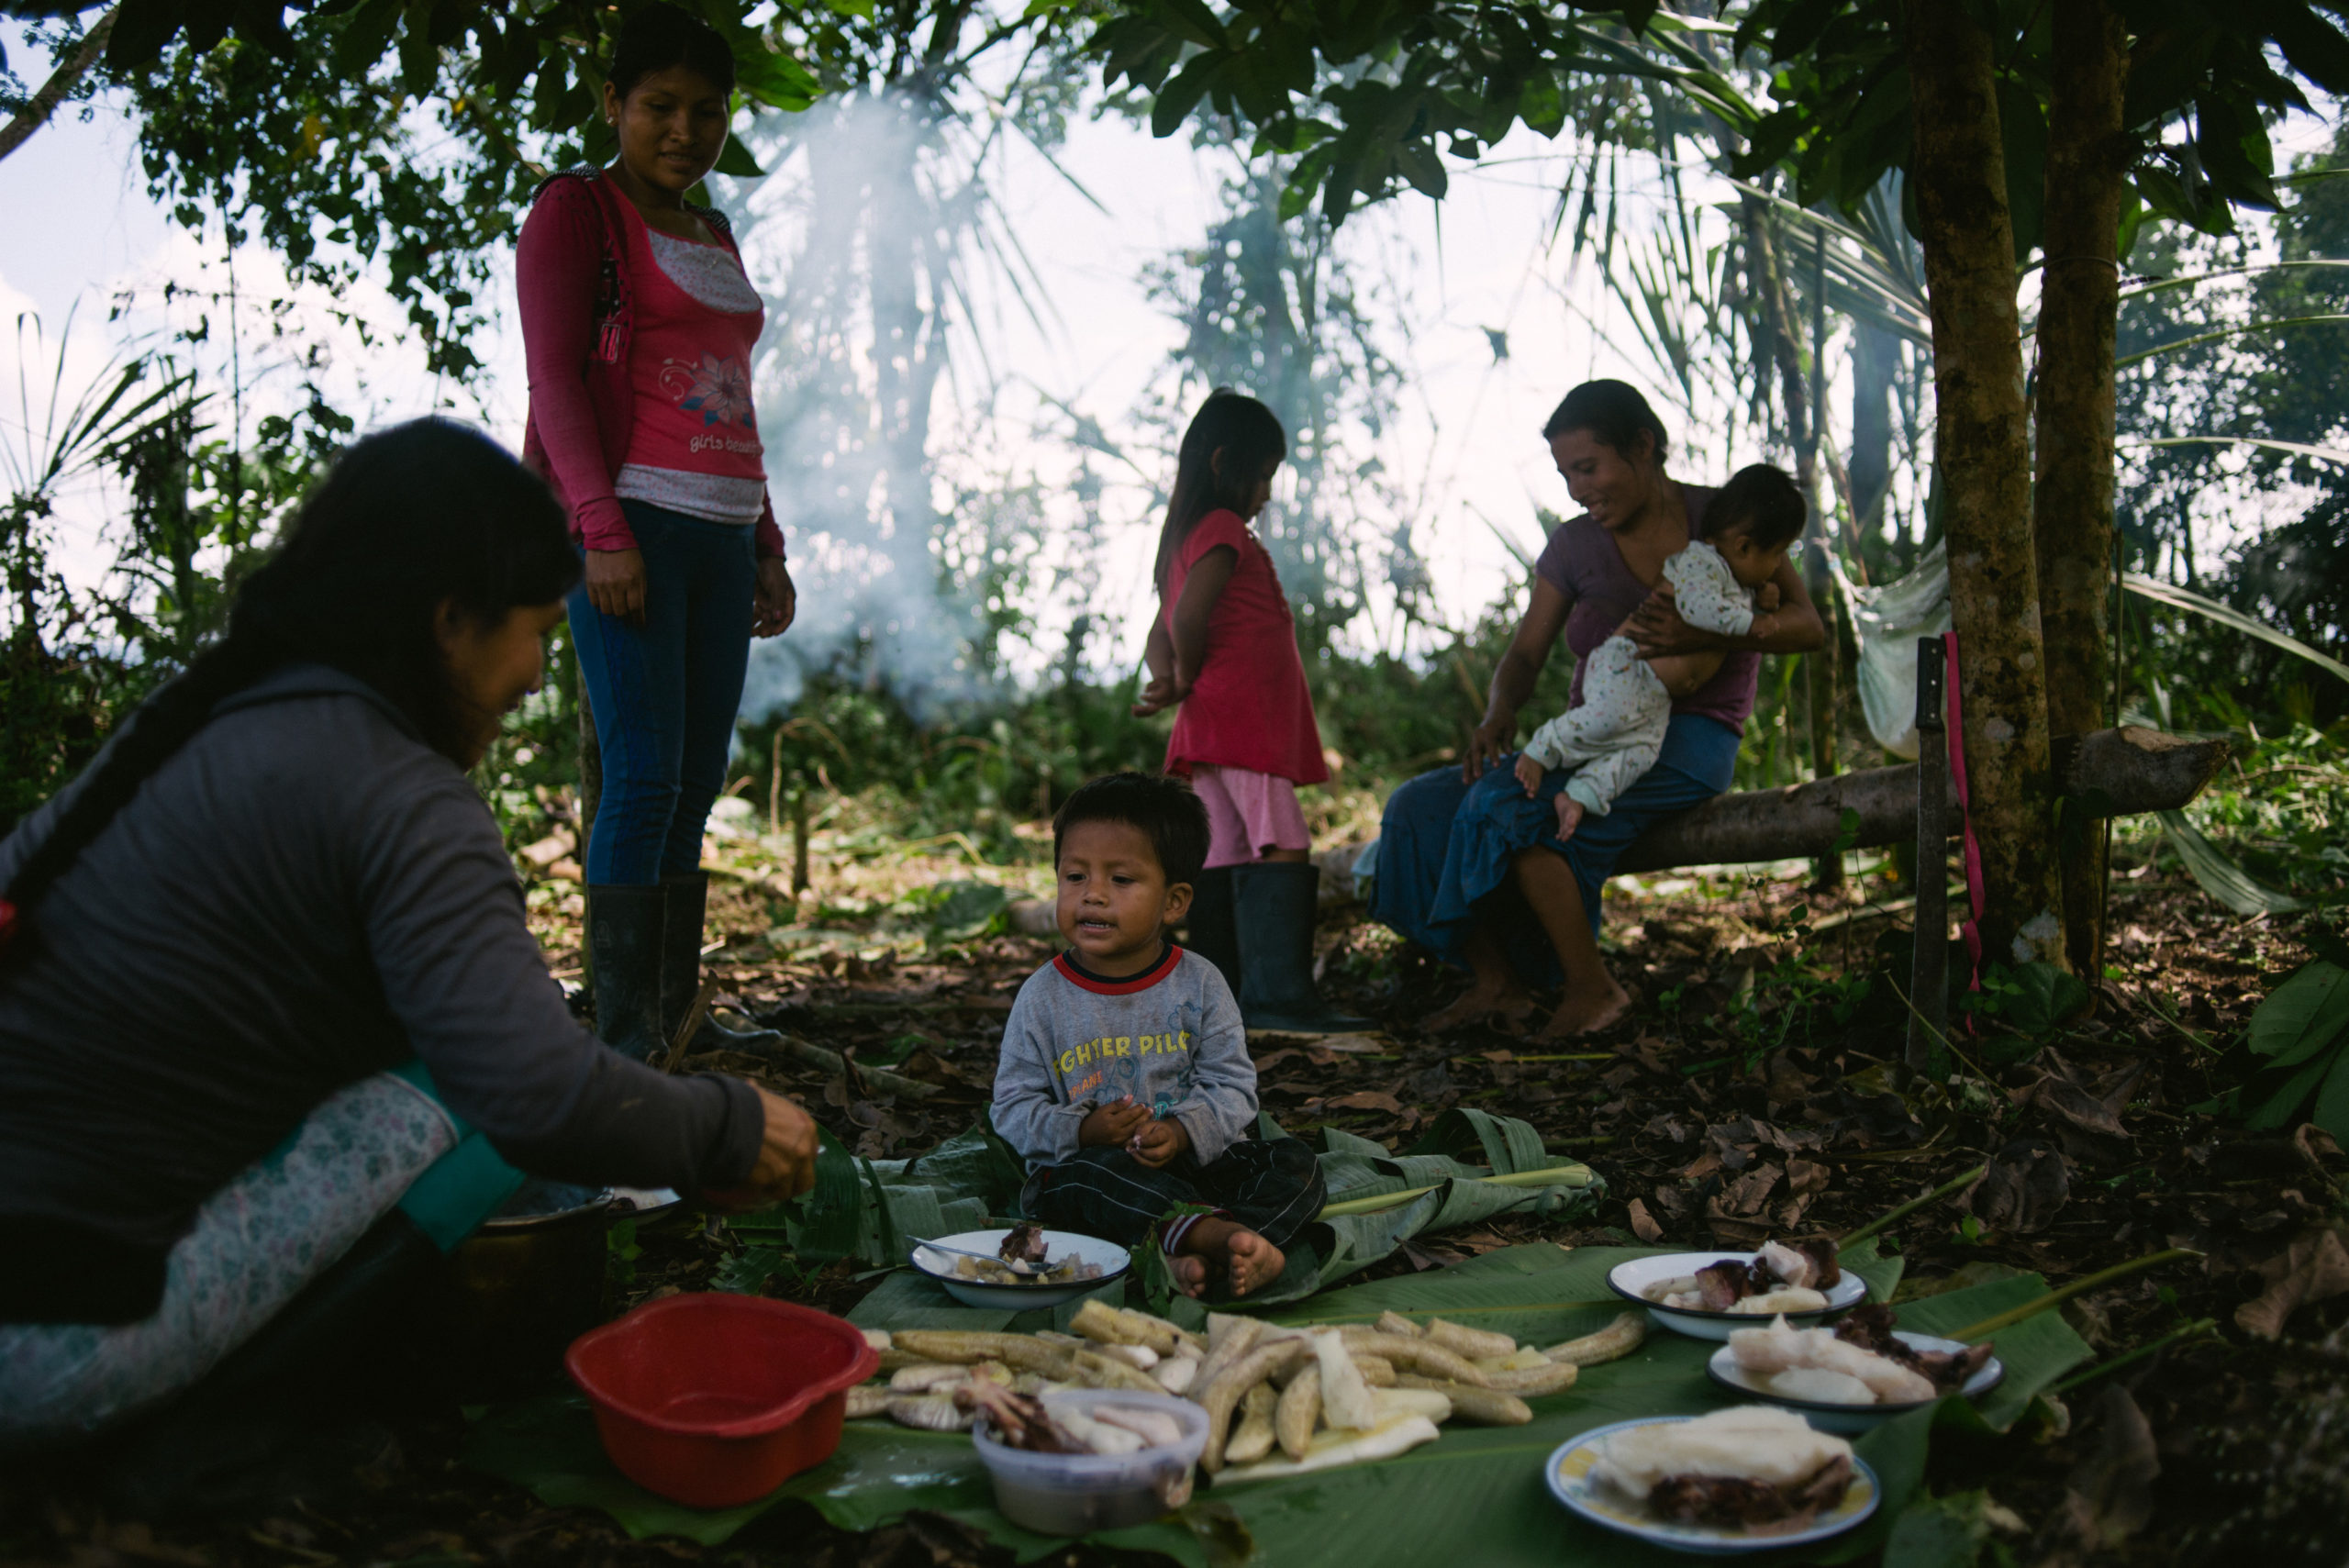 Families of the Wampis Nation prepare a meal in the Peruvian Amazon as legal action on lockdown looms